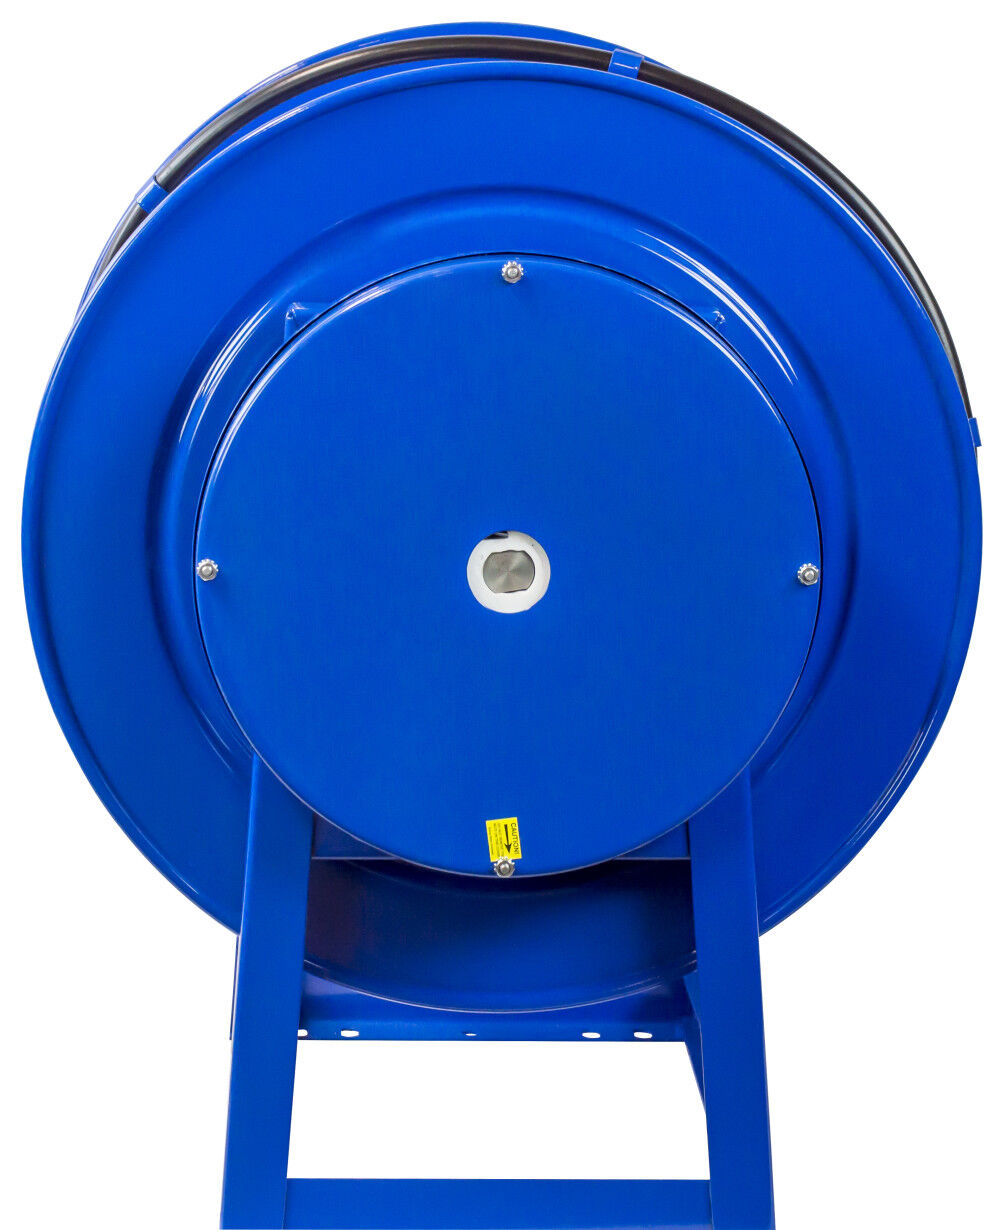 Exhaust Spring Driven Hose Reel 5in x 36' No Hose 332-536